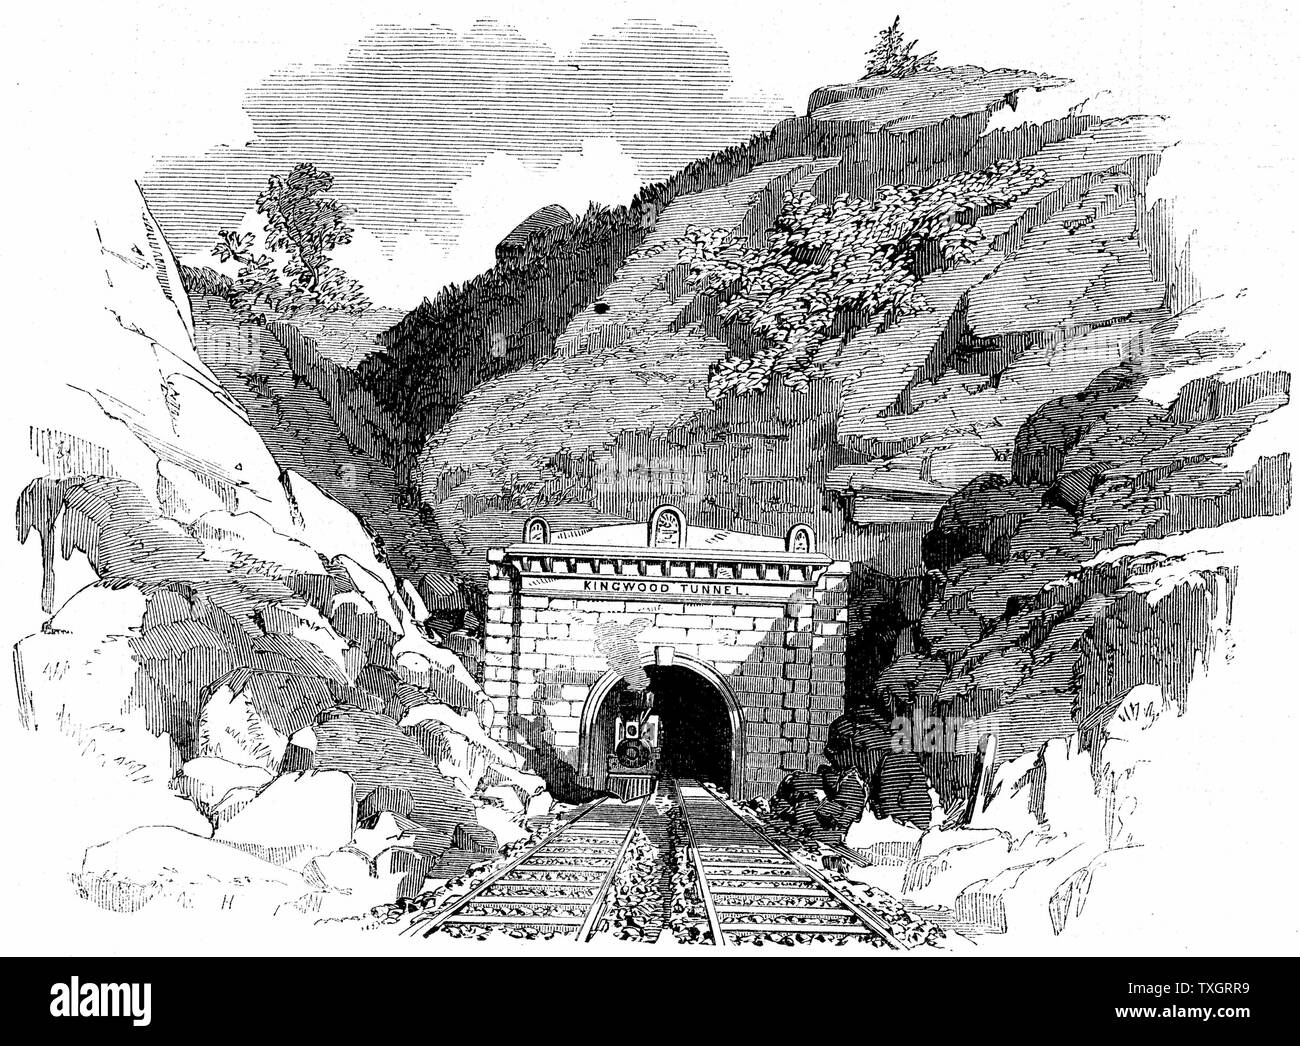 Baltimore and Ohio Railroad: Locomotive emerging from the 4100 ft Kingwood Tunnel through the Alleghany Mountains. From 'The Illustrated London News', May 1861. Wood engraving. Stock Photo